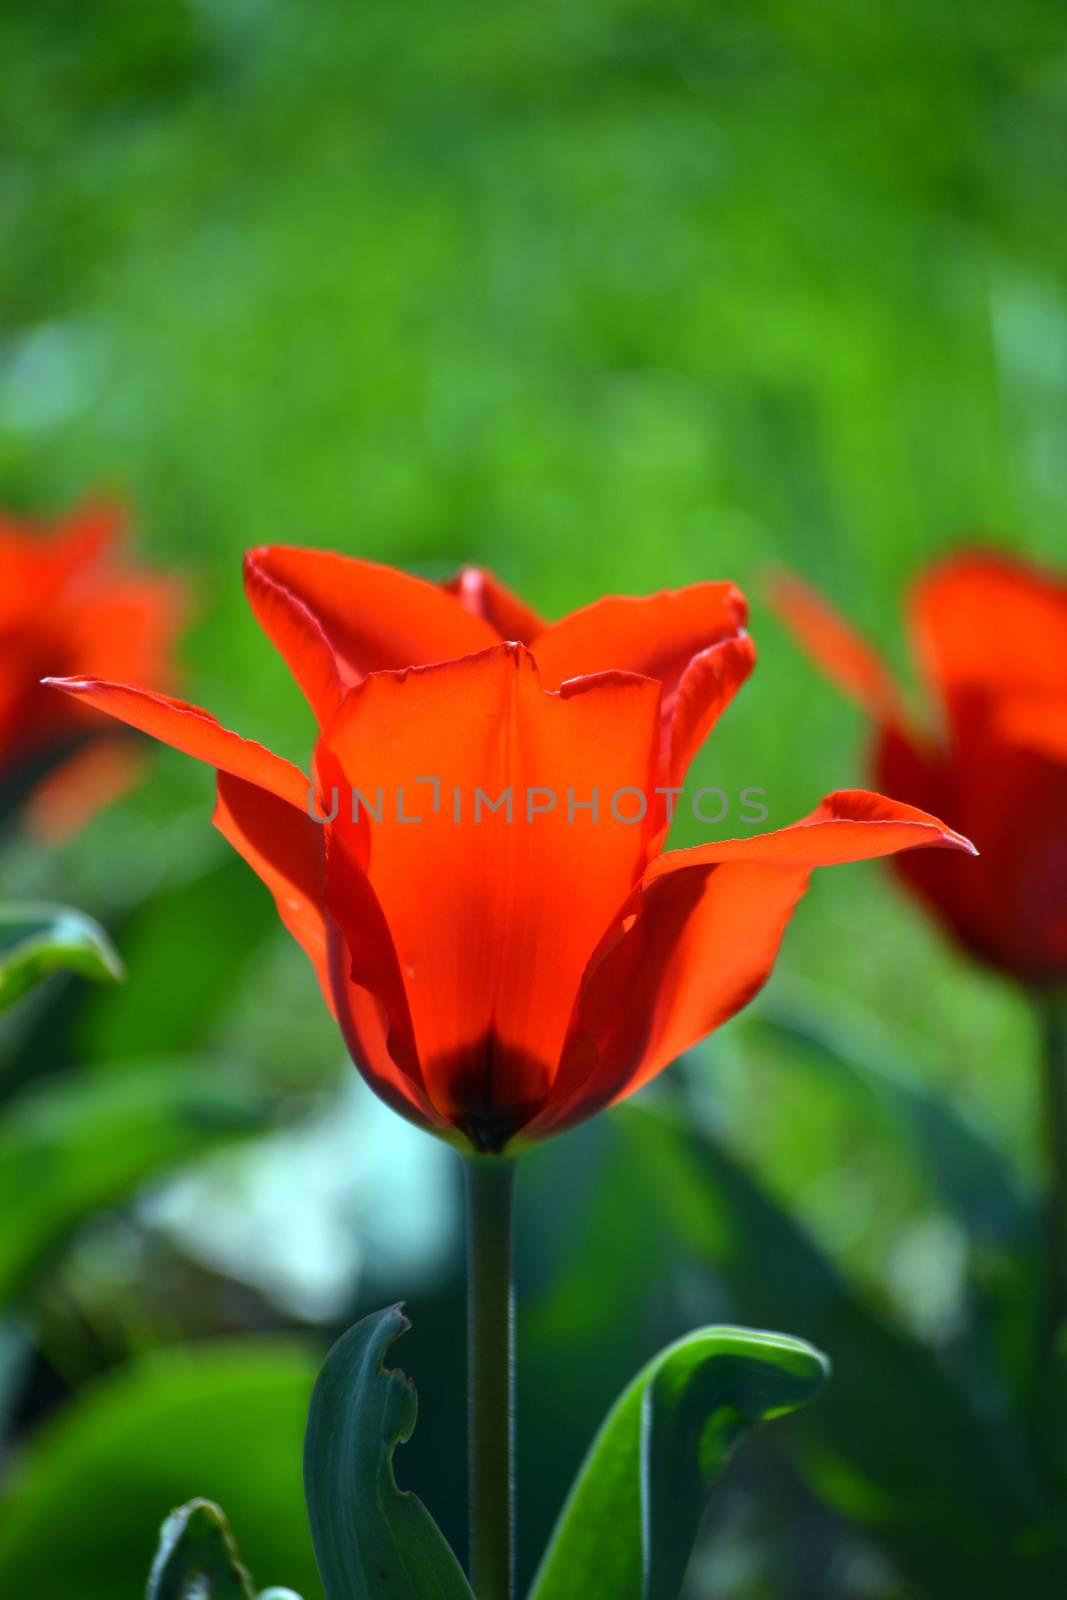 Red tulip on green background by hibrida13